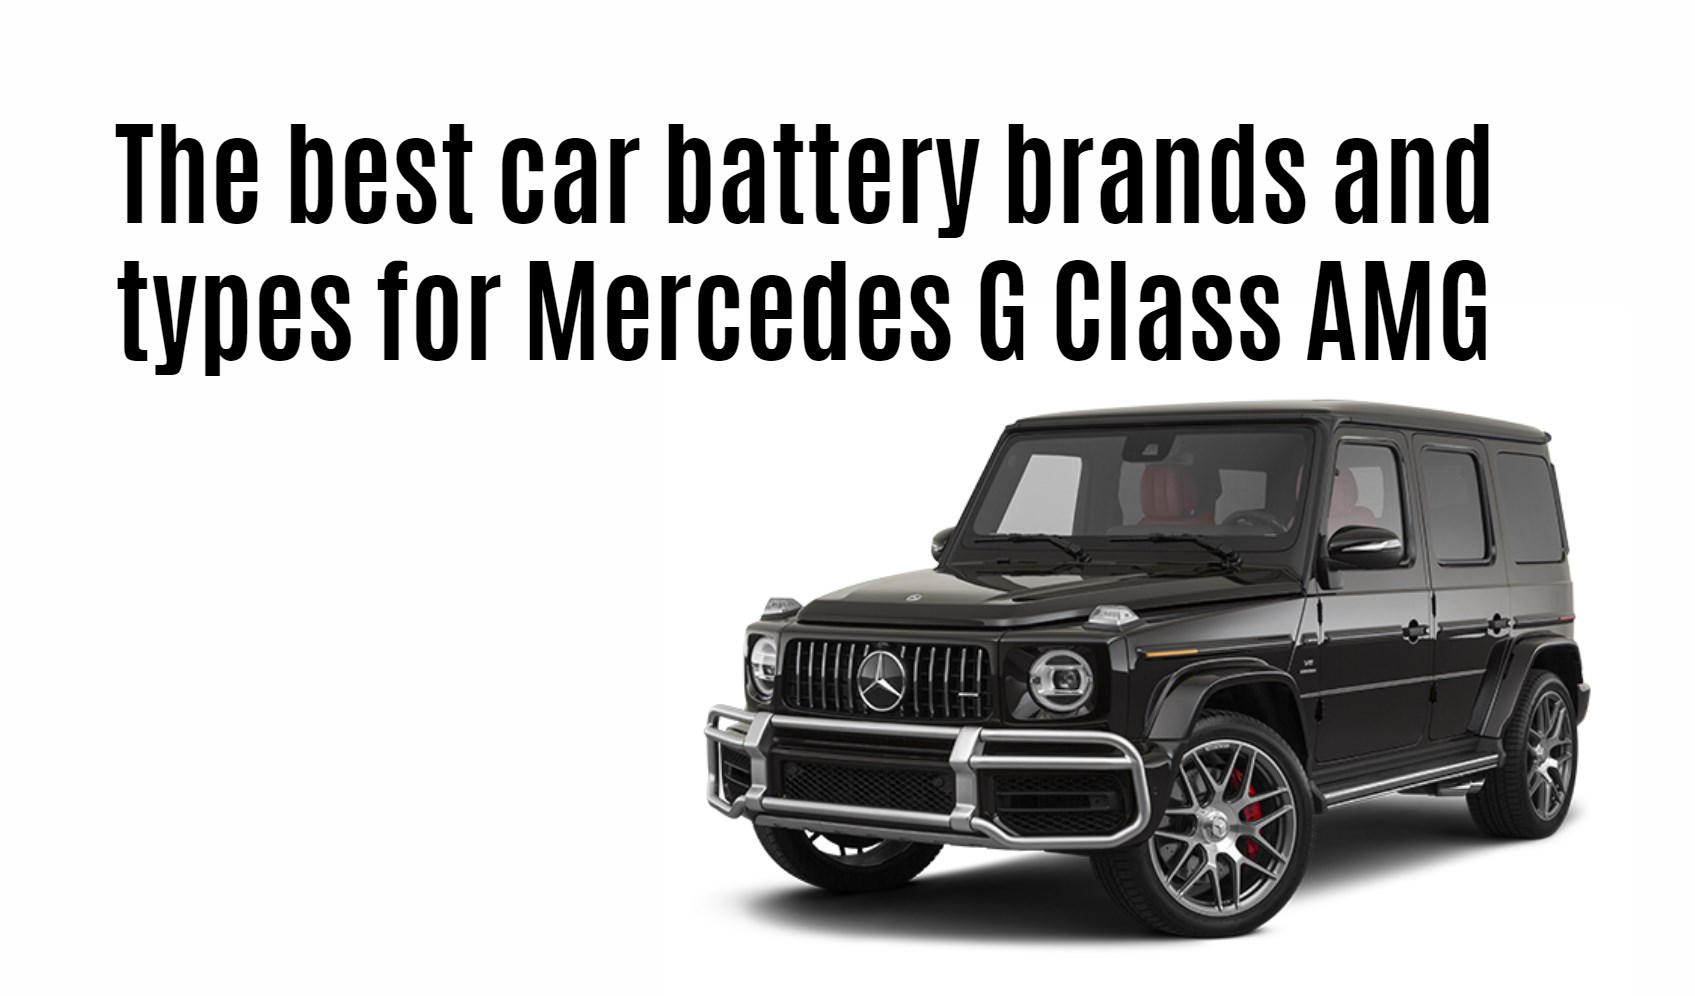 The best car battery brands and types for Mercedes G Class AMG